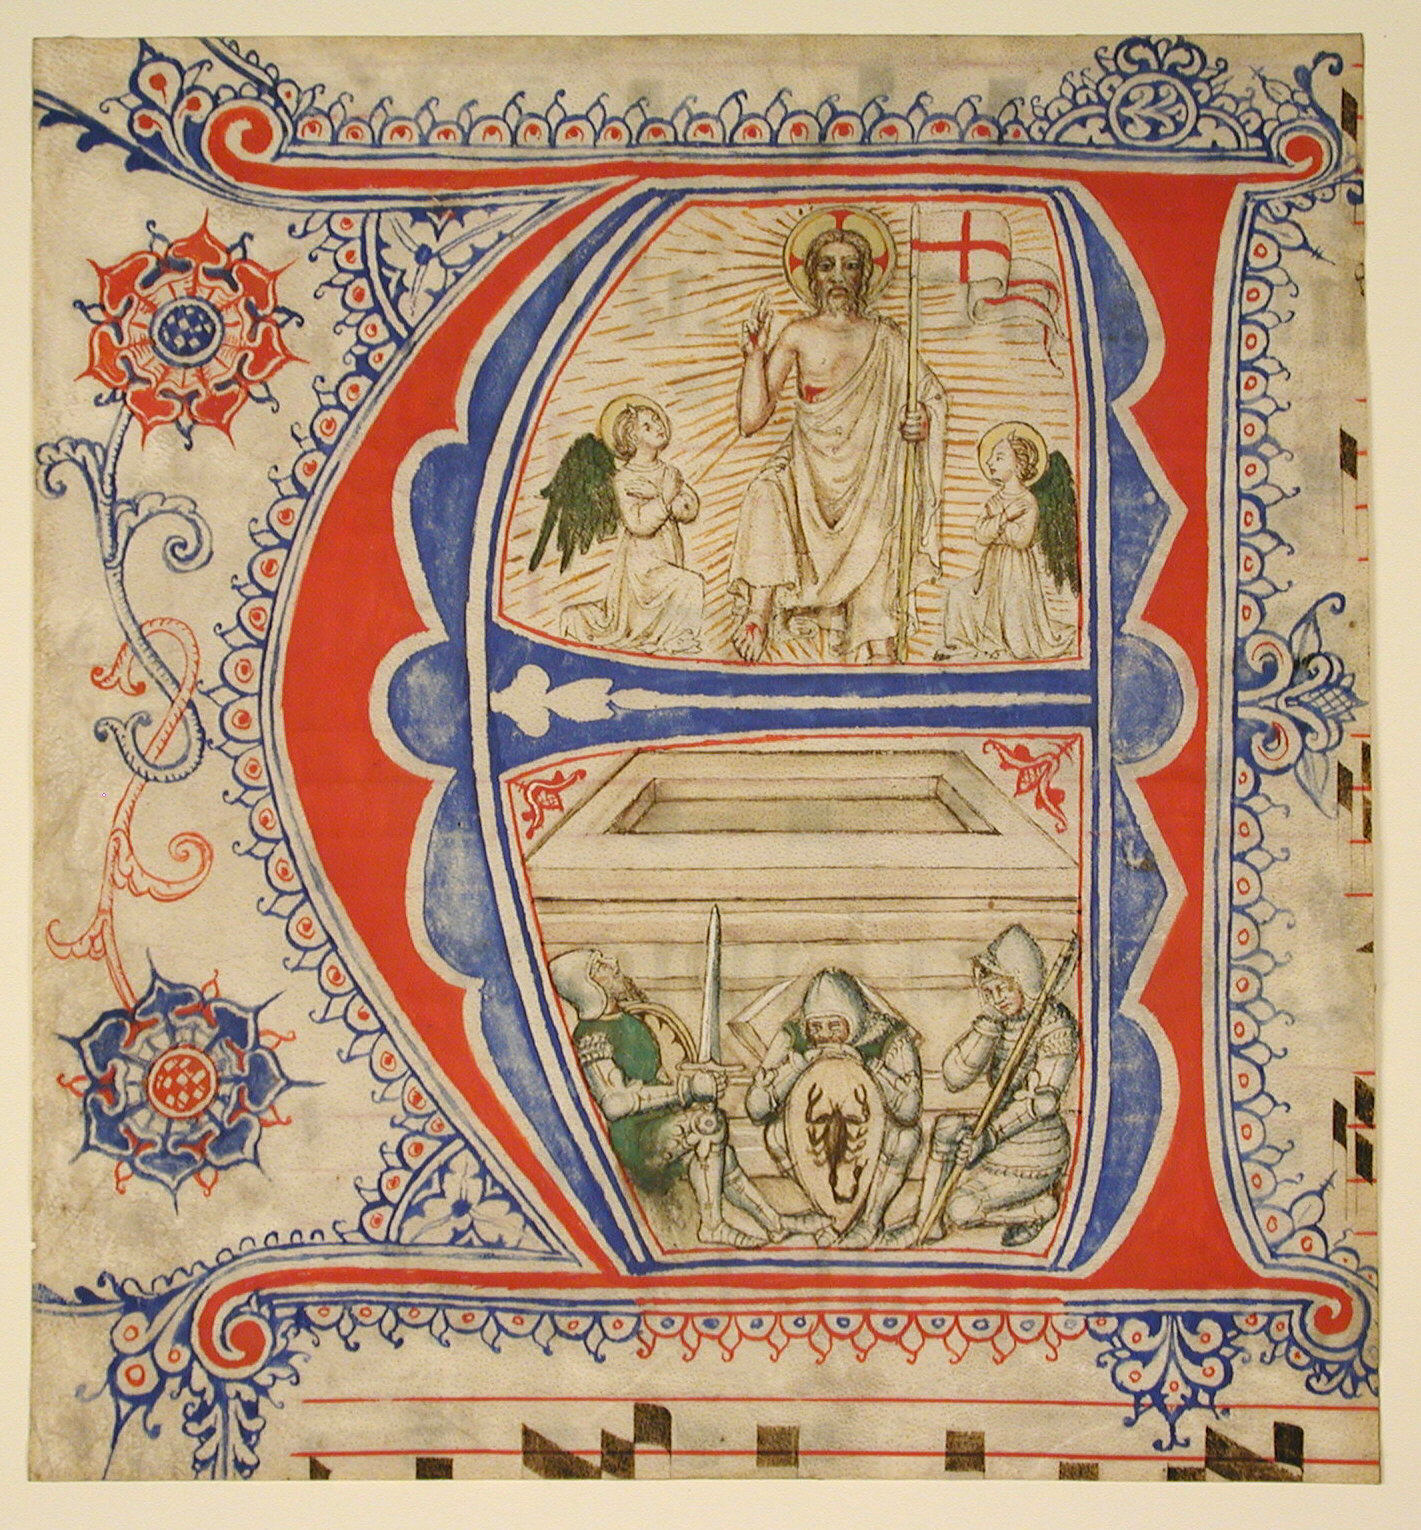 illustrations in the margins of medieval manuscripts